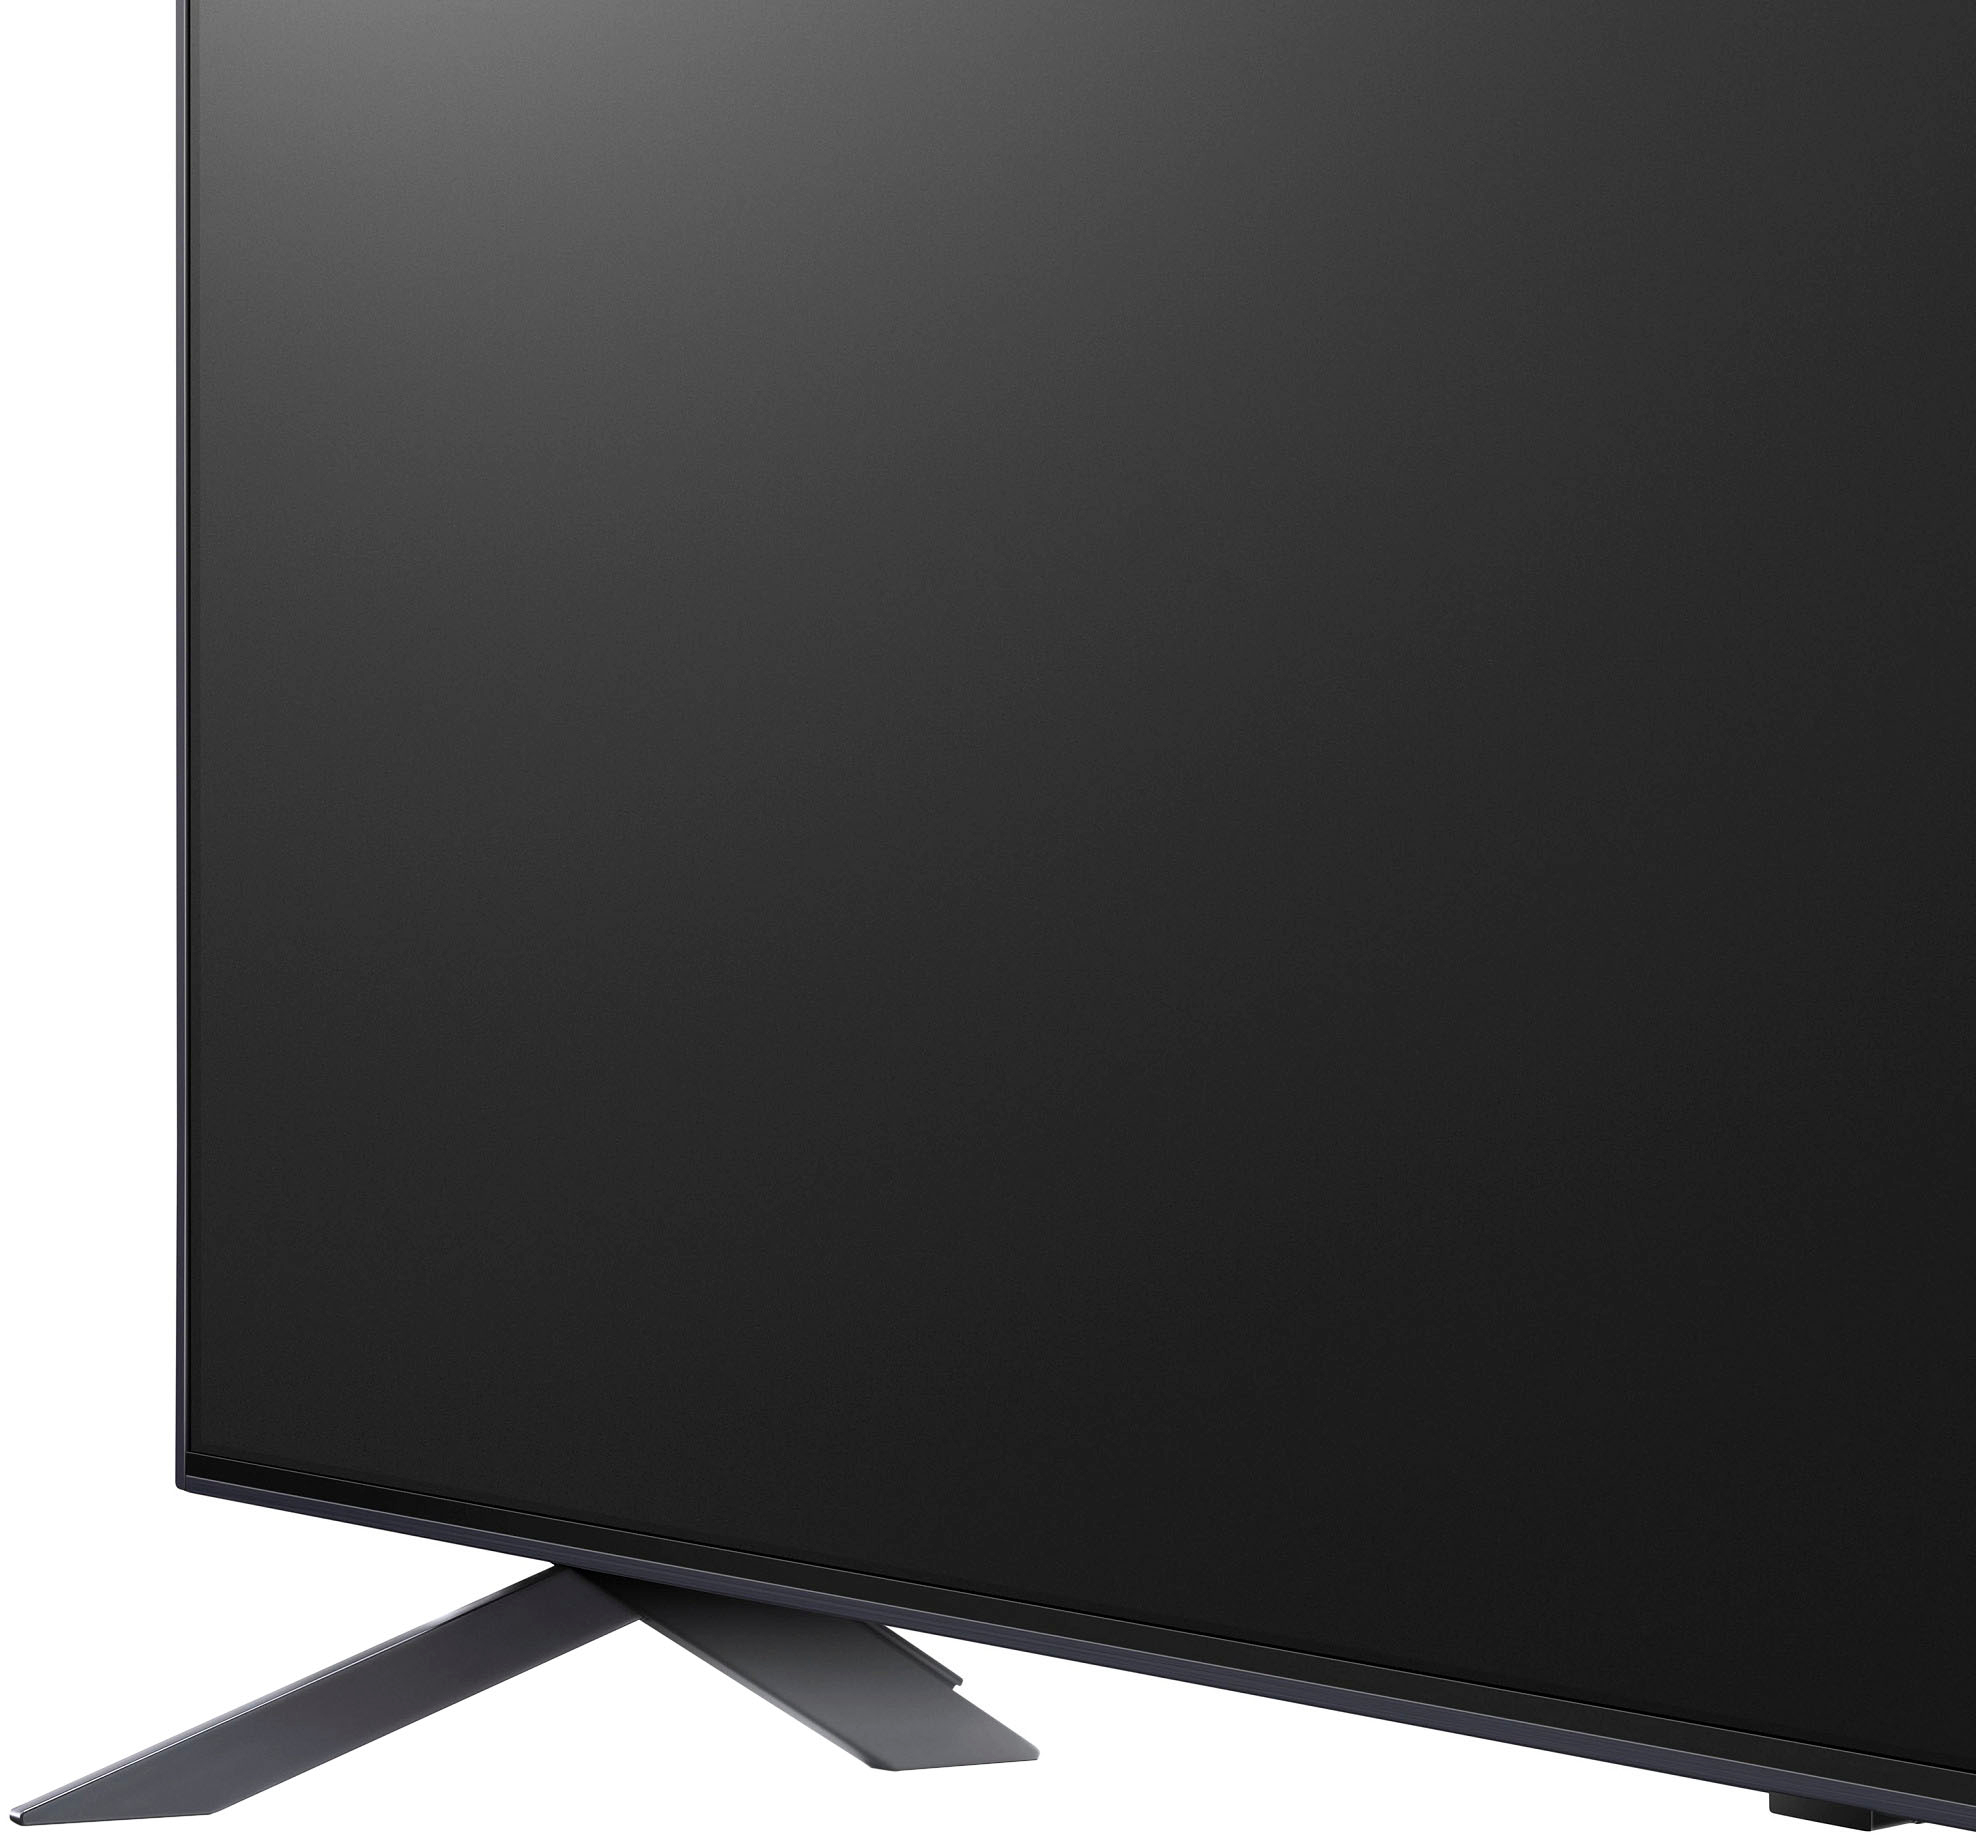 LG 55QNED80URA (55) QNED 80 Series Quantum Dot NanoCell Smart LED 4K UHD TV  with HDR at Crutchfield